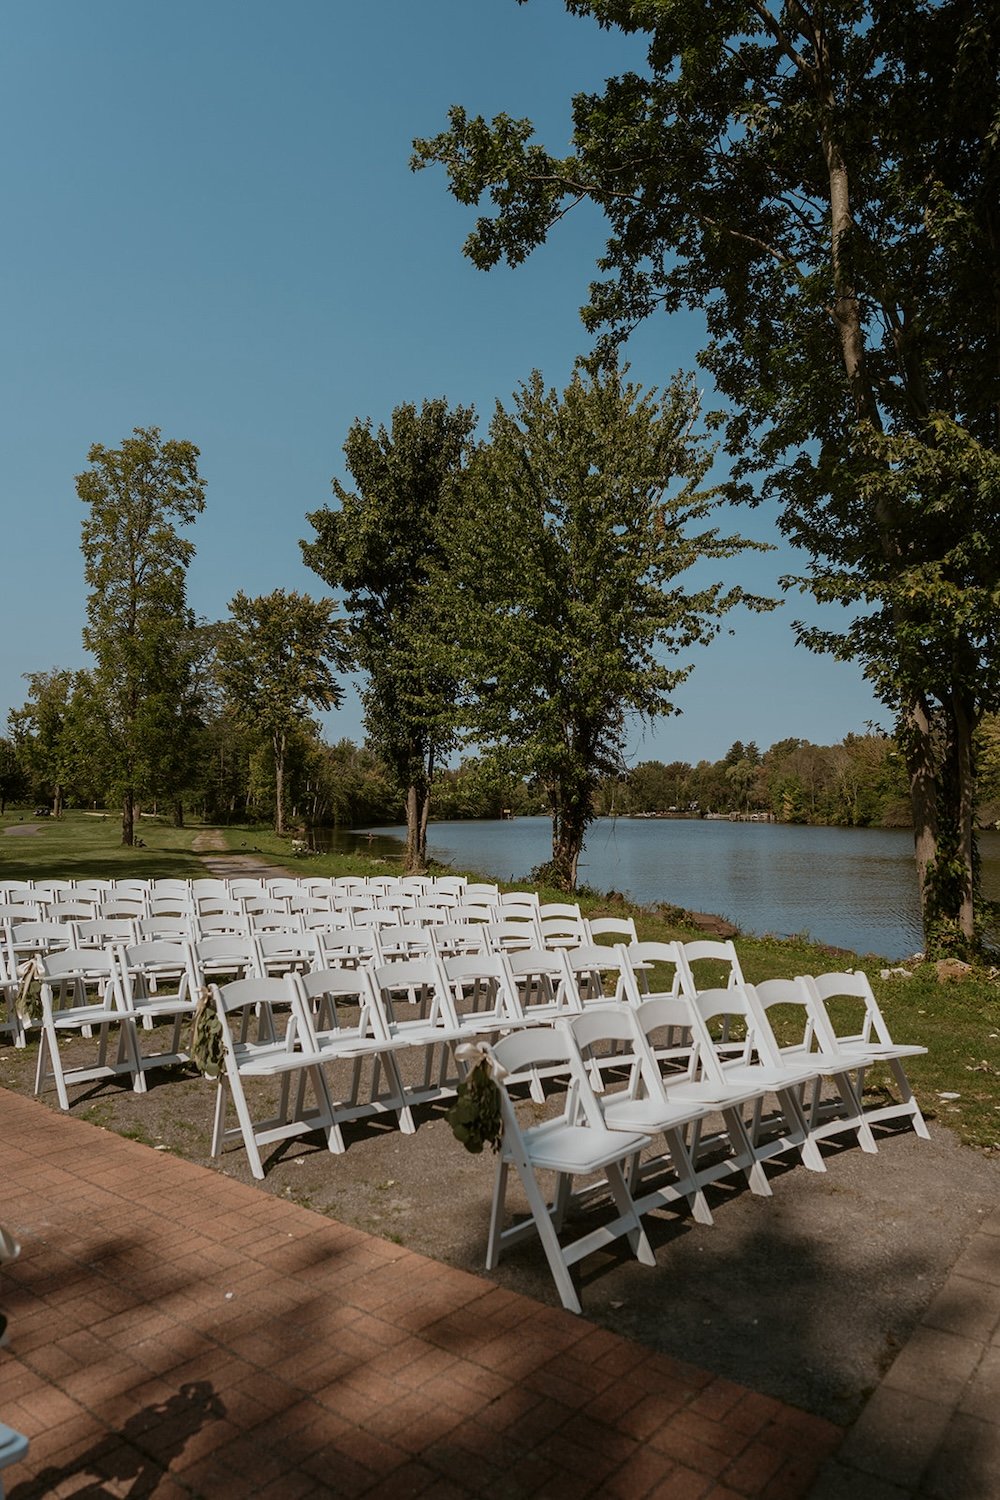 The guest seating with a view of the water.